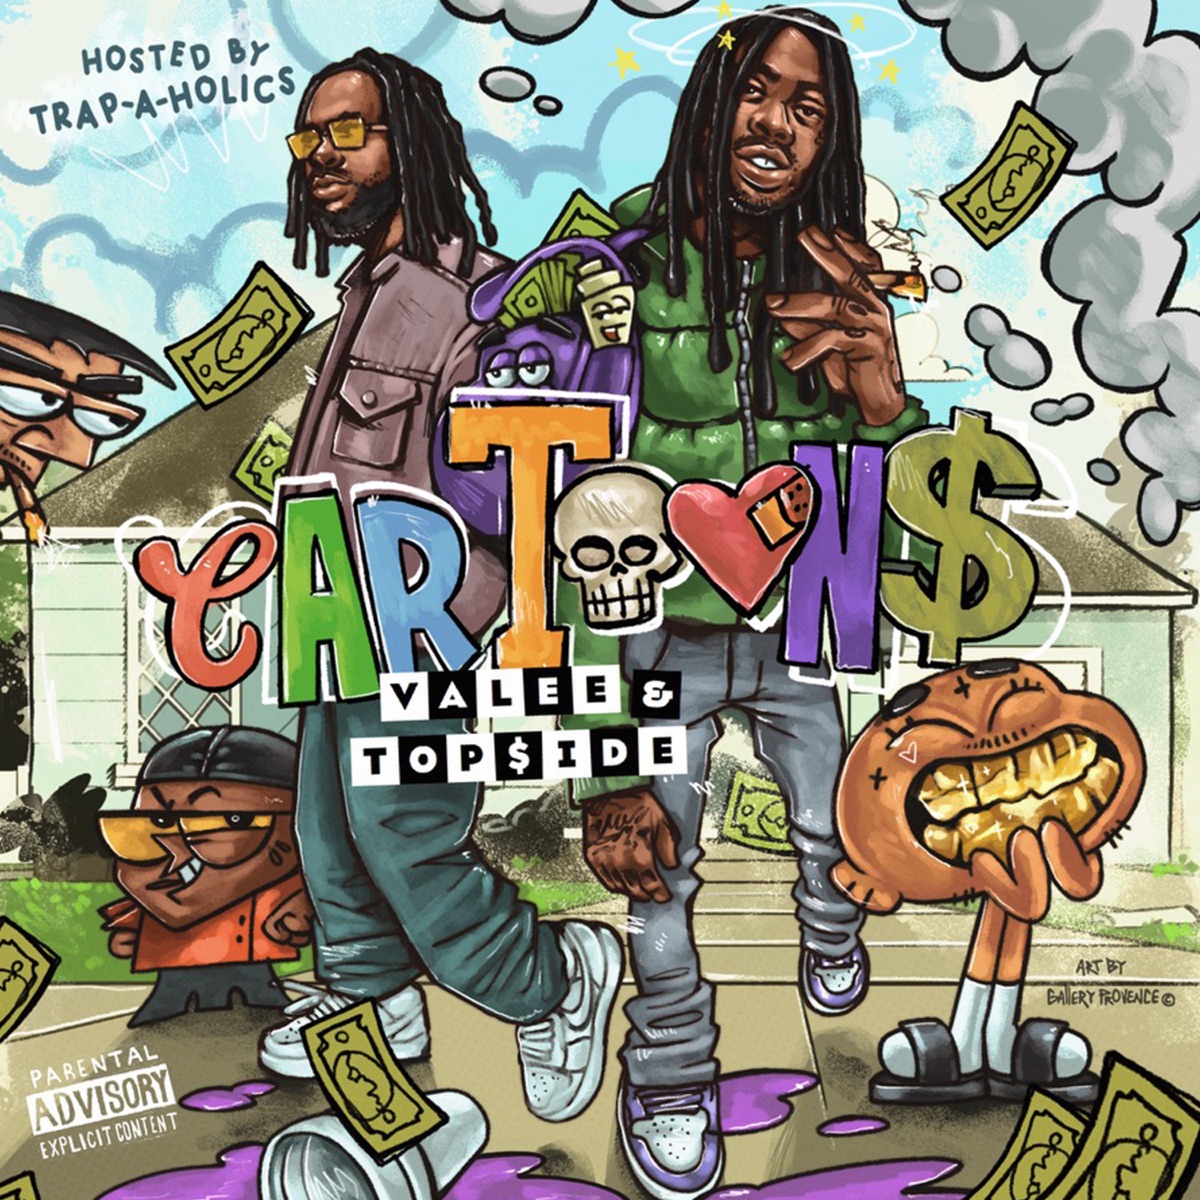 Valee, Top$ide & Trap-A-Holics – Aneater Baker